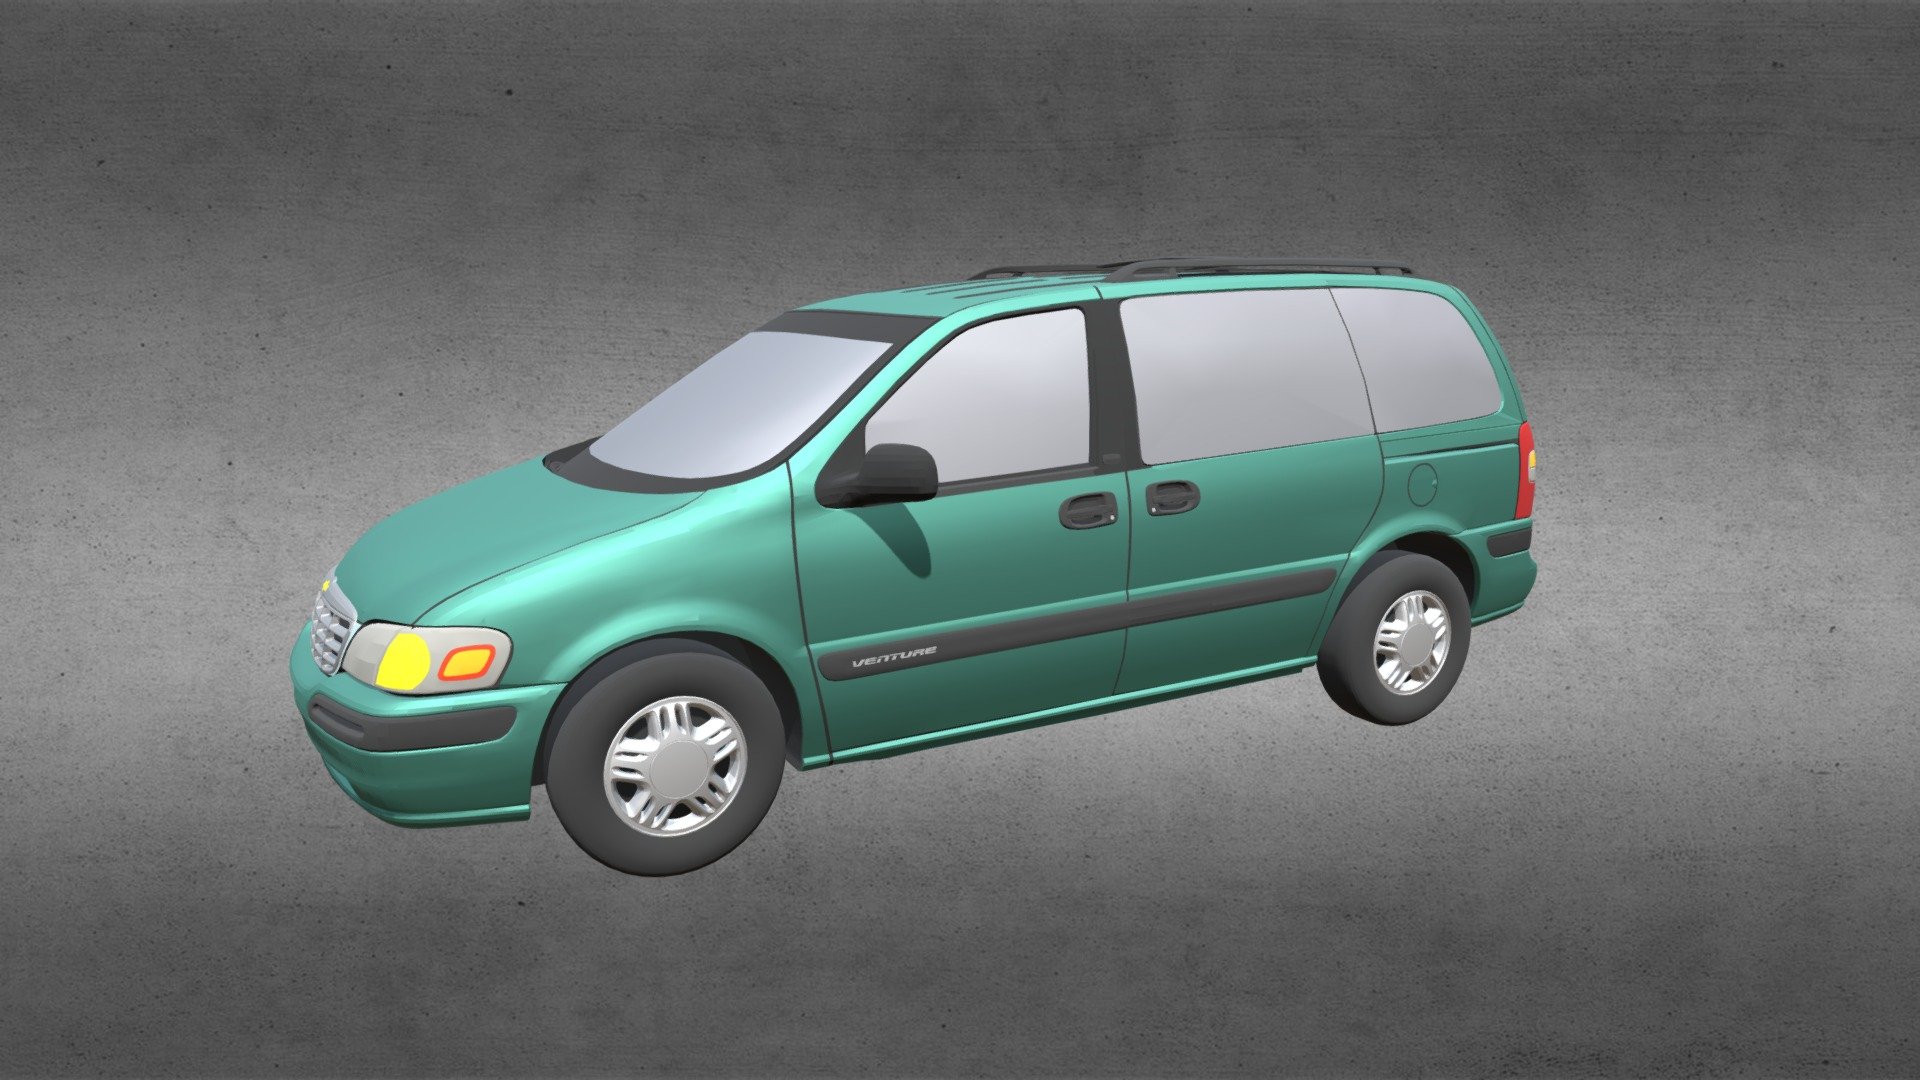 The Venture was introduced in 1996 for the 1997 model year as a replacement for the radically styled Lumina APV. In the United States, it was also sold as the Oldsmobile Silhouette and the Pontiac Trans Sport, which was later renamed as the Pontiac Montana for 1999 (2000 in Canada).

This digital model is based on the 1998 version of the Chevy Venture.

Product Features:
- Made entirely with 3 and 4 point polygons.
- Does not have an interior cabin, so we recommend darkening the windows.
- Because of this, the doors are not separate parts.
- All 4 wheels are separate parts.
- Although the model includes these parts, this version of the model is not rigged.
- Includes logically named materials, which makes it very easy to recolor the model.
- The model has basic UV mapping and NO textures are included. You'll need to apply your own shaders, such as metal and fabric.

Original model by Digimation and sold here with permission 3d model